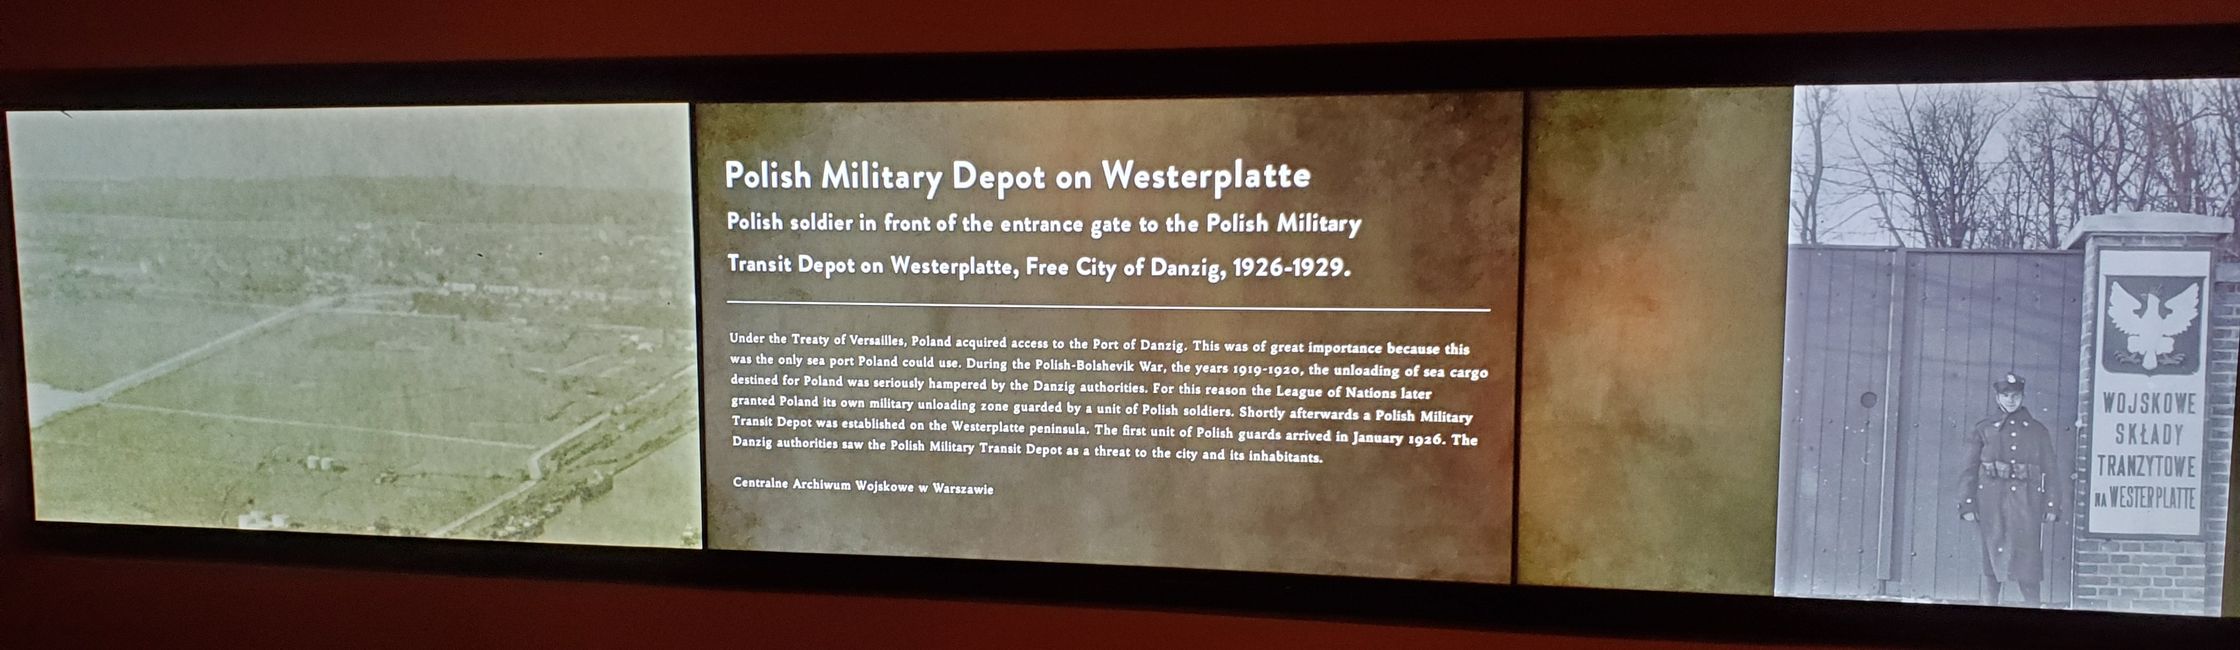 The reason for the attack on Westerplatte